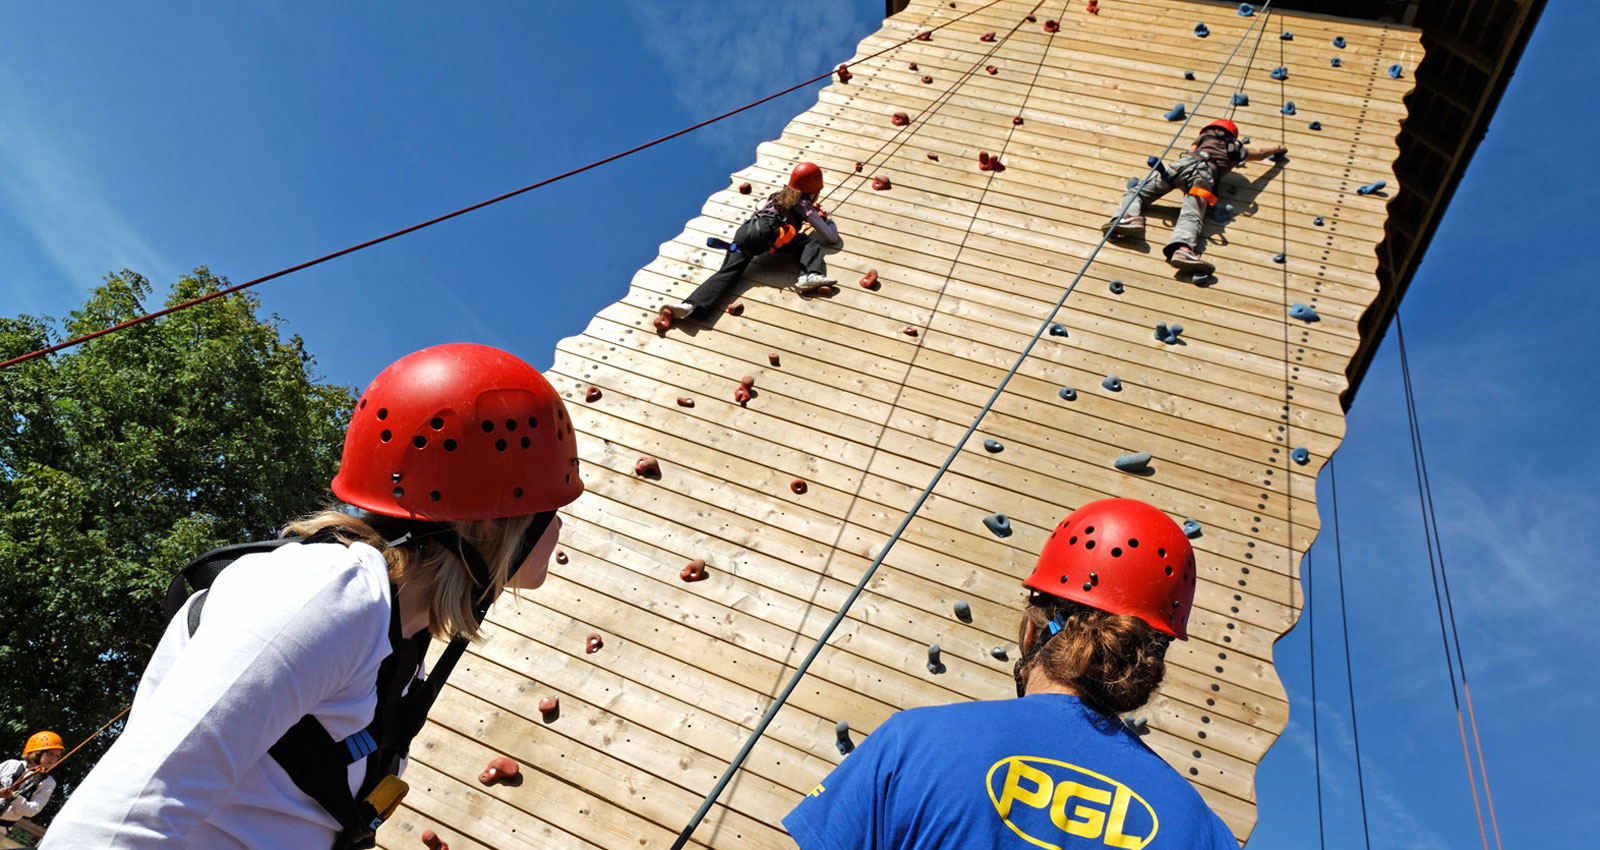 PGL Adventure Holidays - Specialist Holidays and Summer Camps for 7-17 year olds - PGL Centres and Accommodation